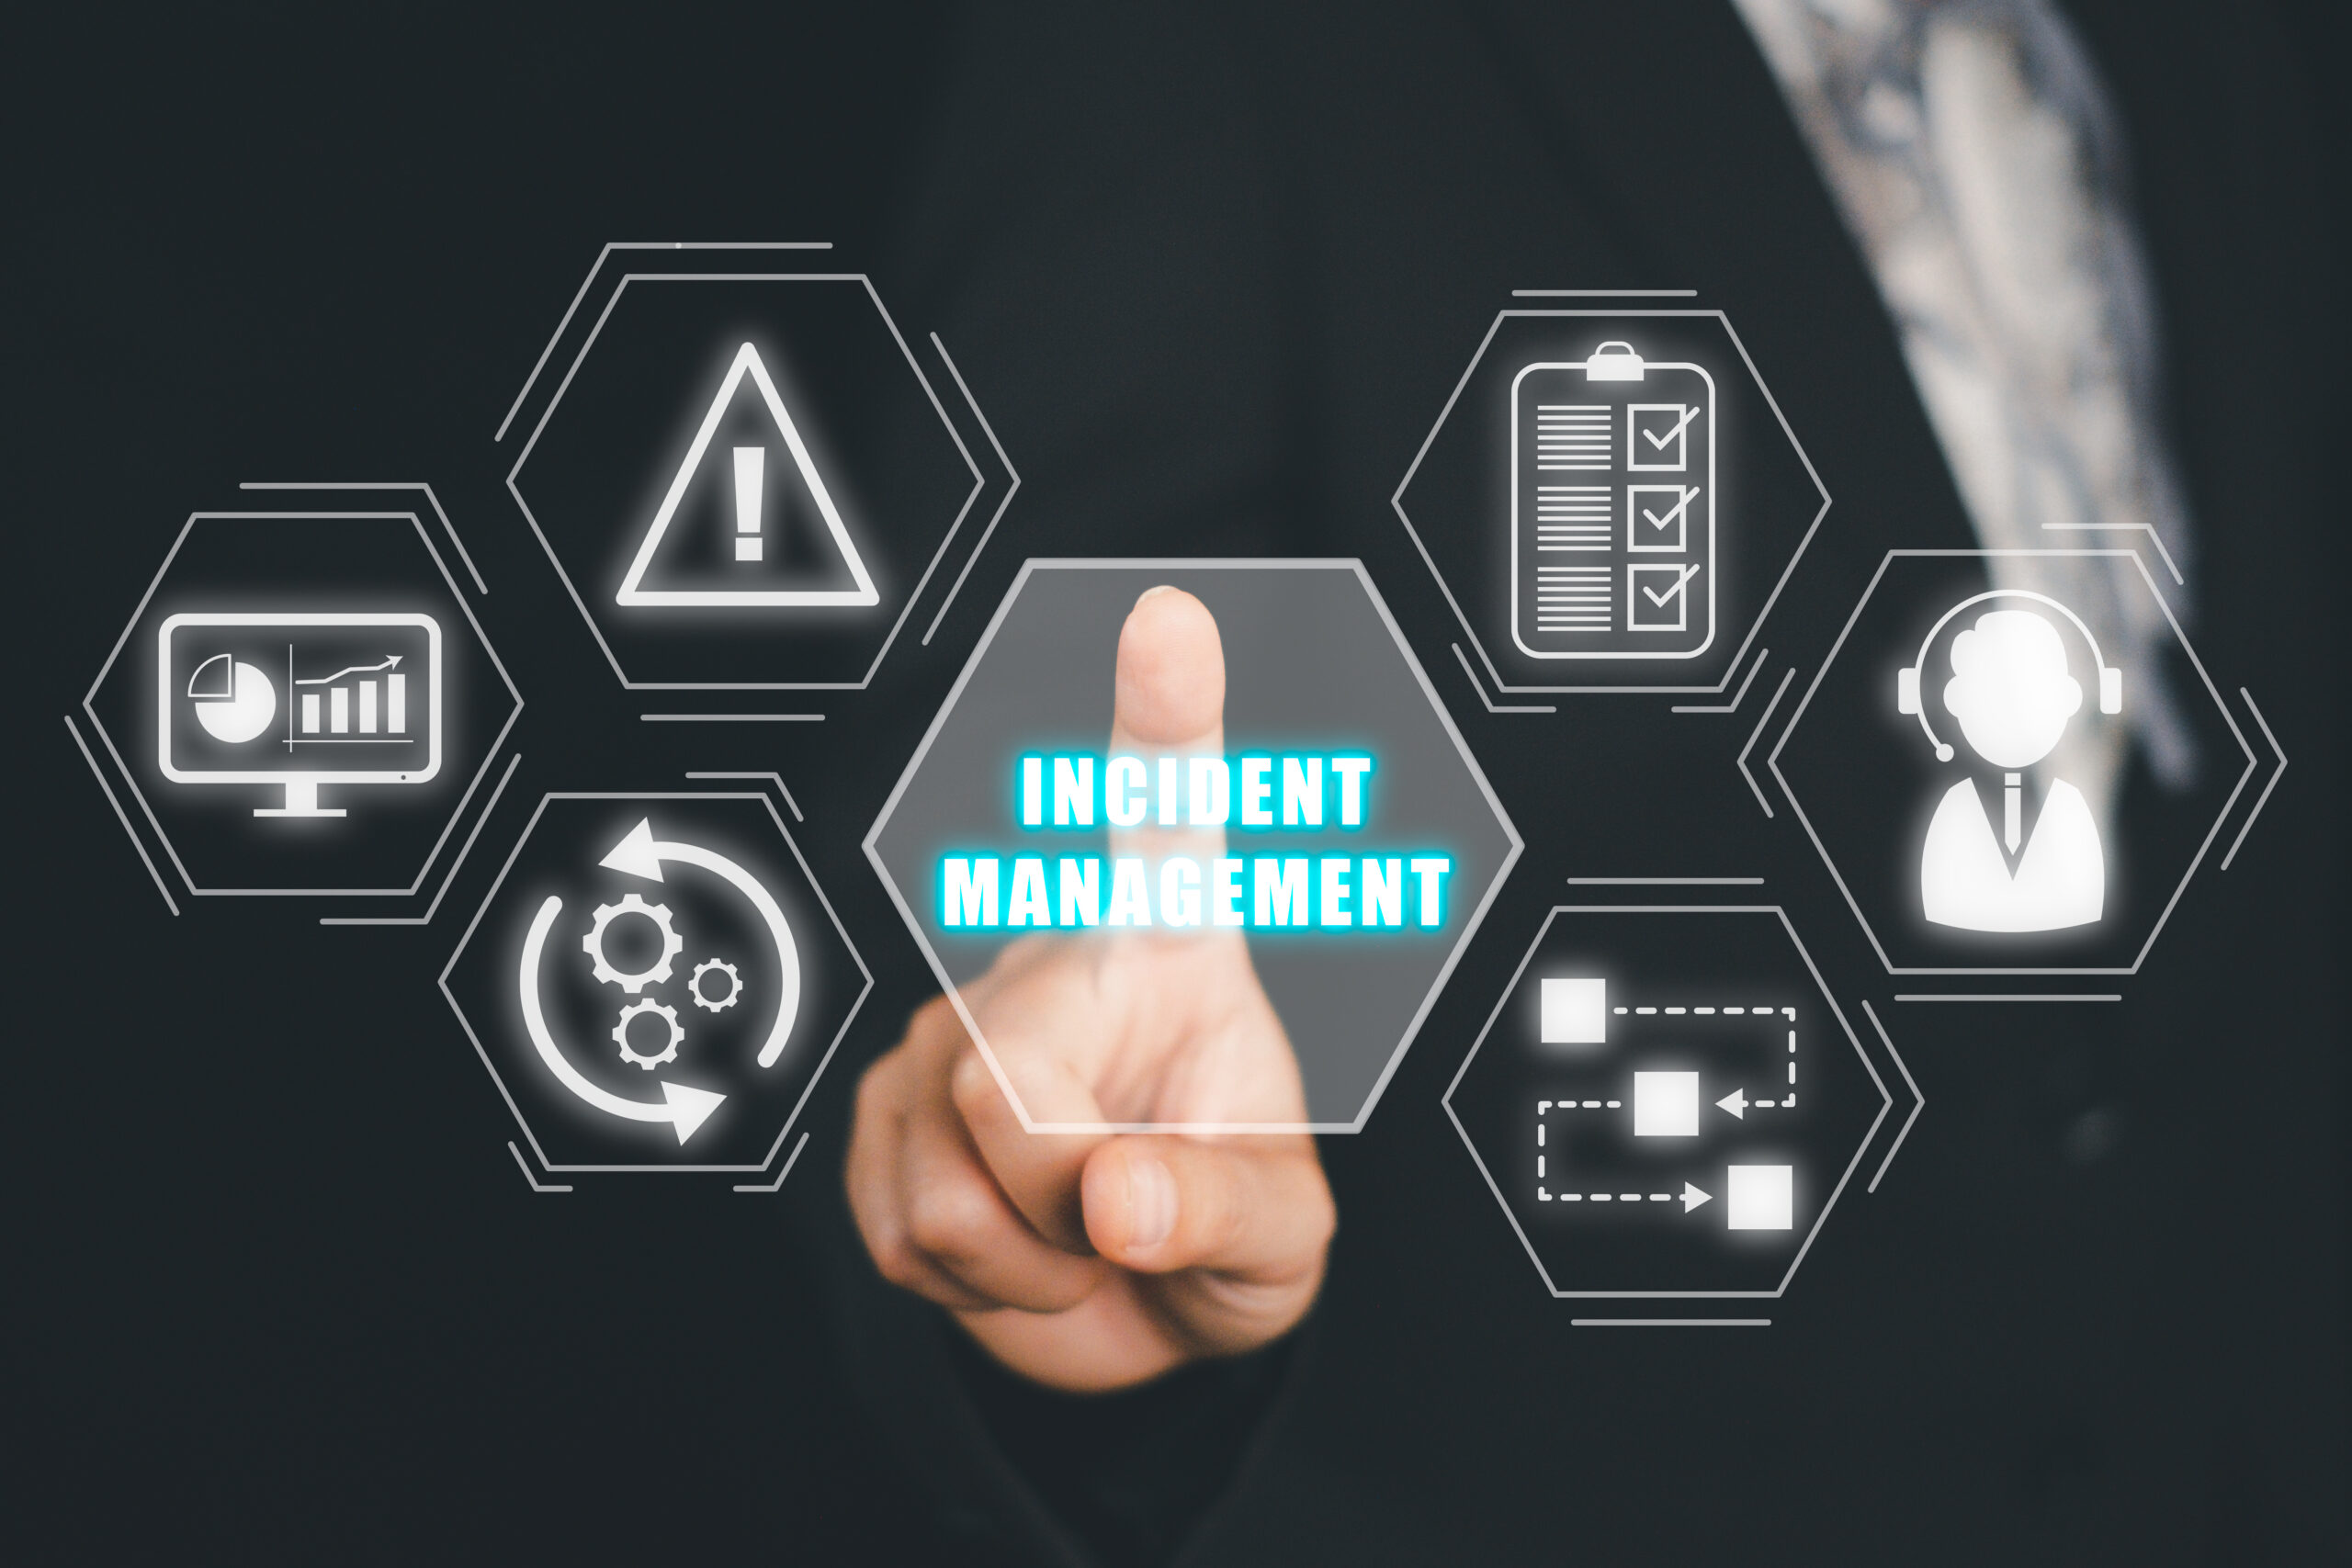 5 effective ways to implement an incident management process thumbnail image